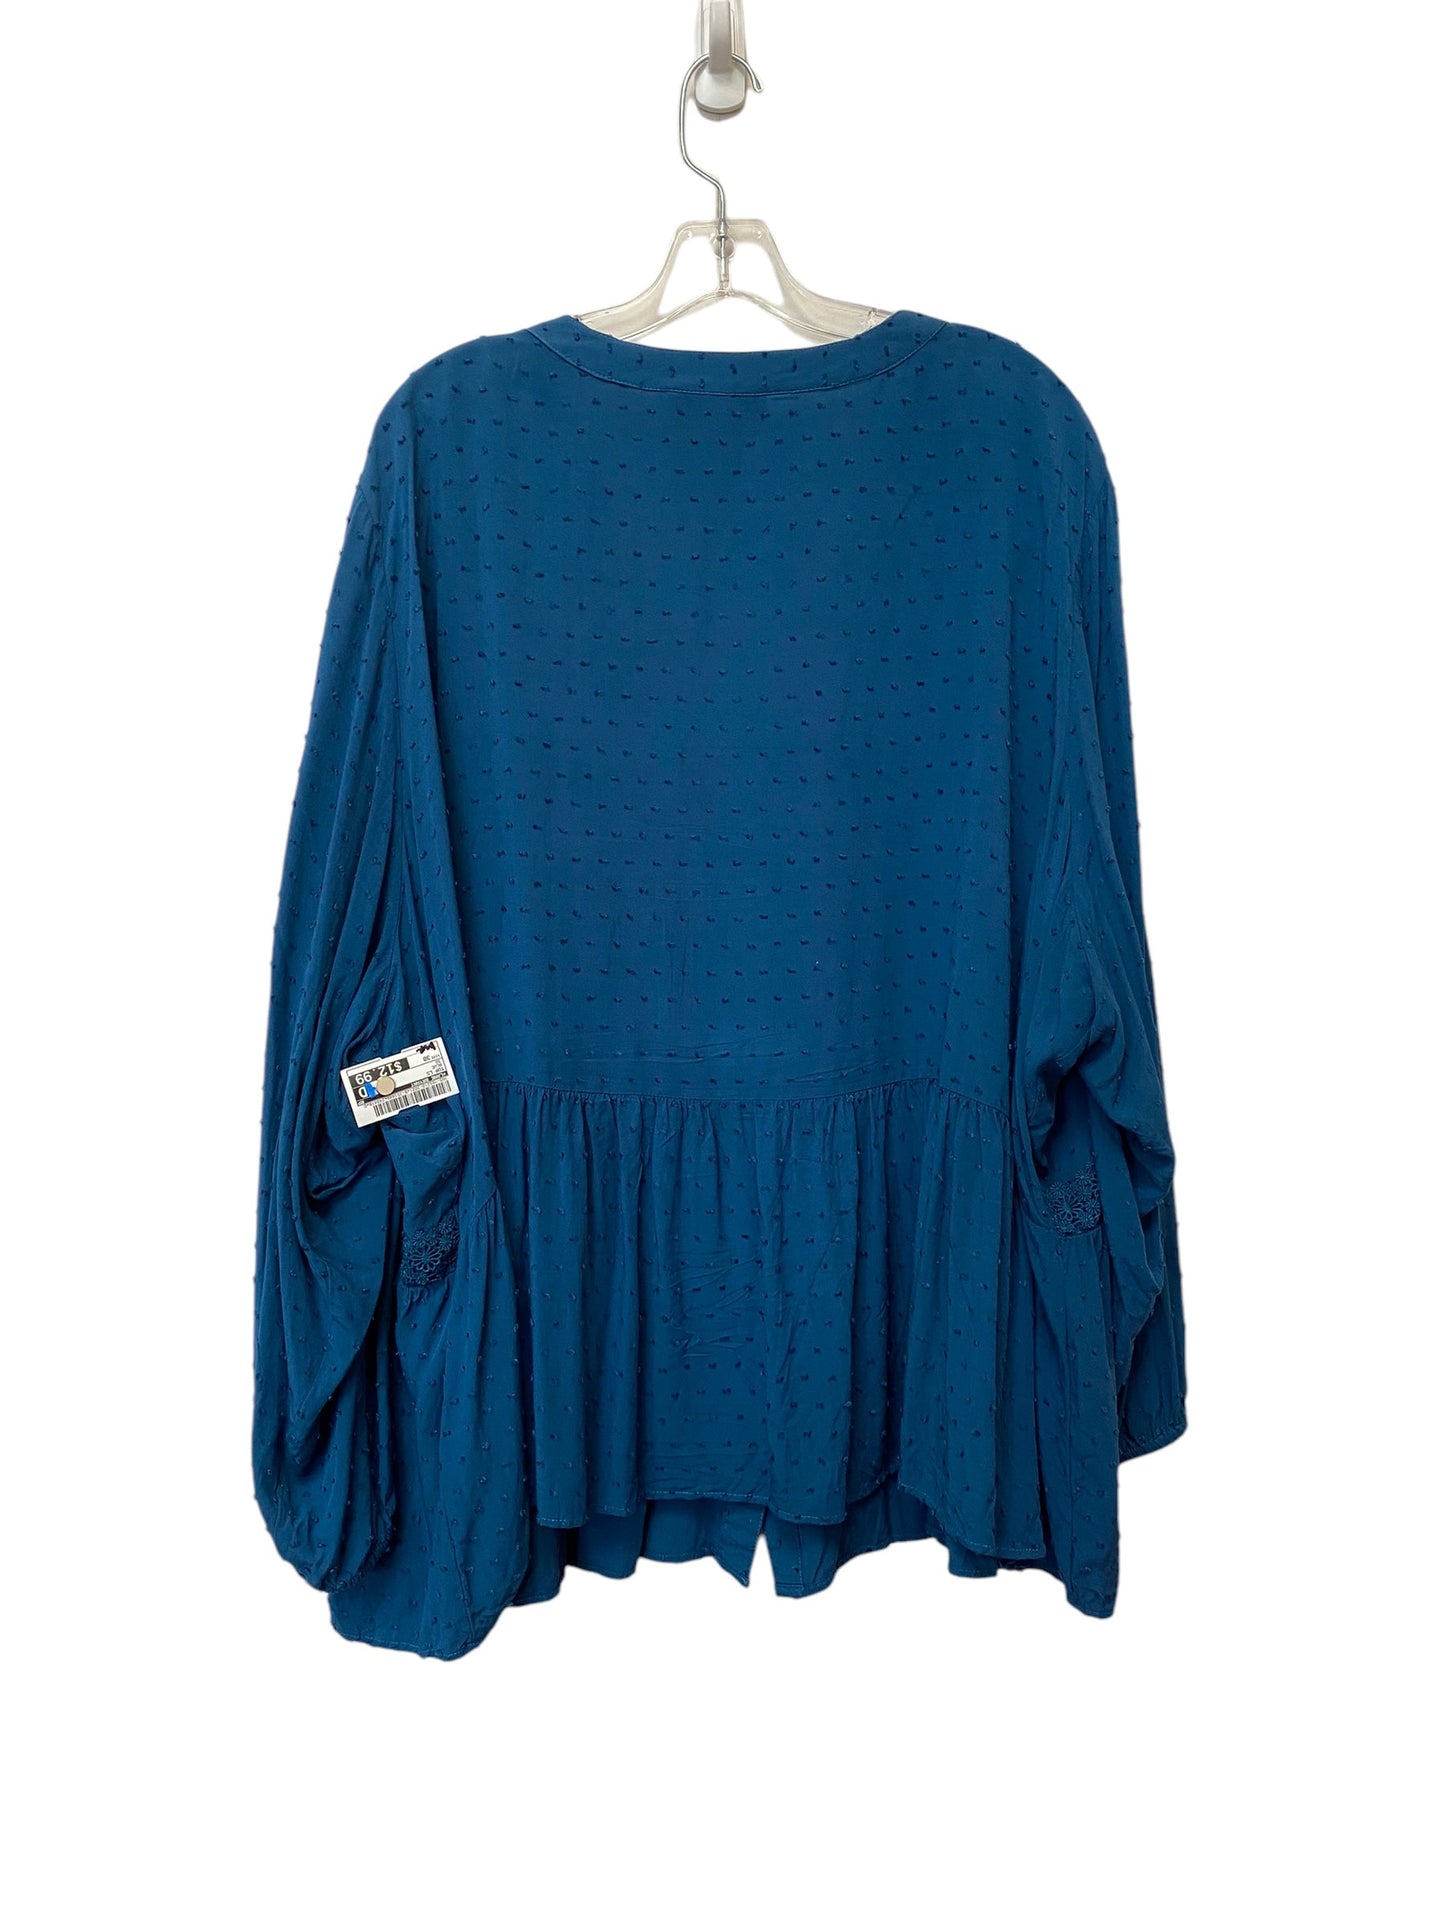 Top Long Sleeve By Lane Bryant  Size: 30